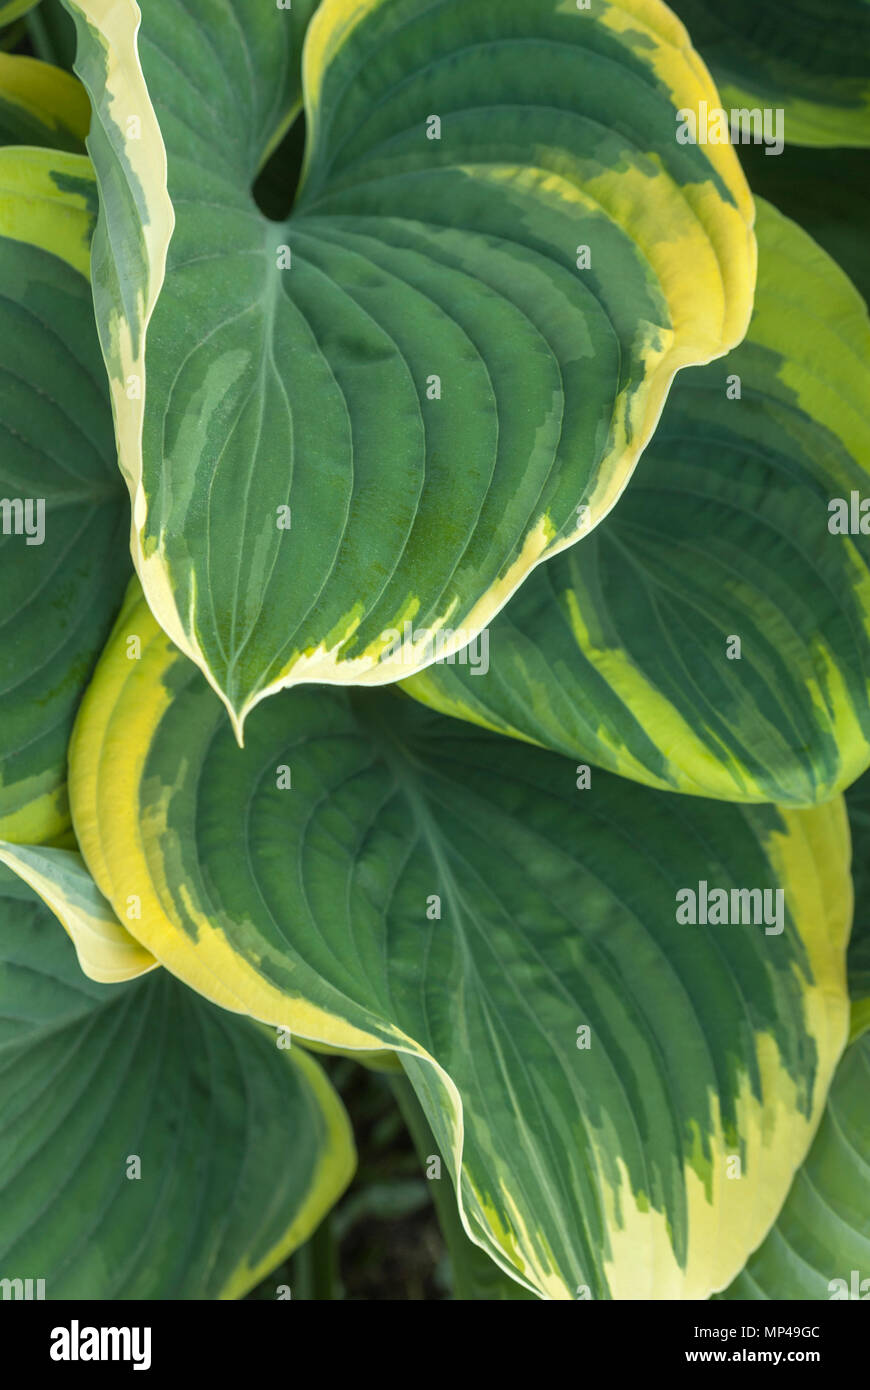 An intimate view of Green and yellow Variegated Hosta leaves in May. Vandusen Botanical Garden, Vancouver, British Columbia, Canada Stock Photo